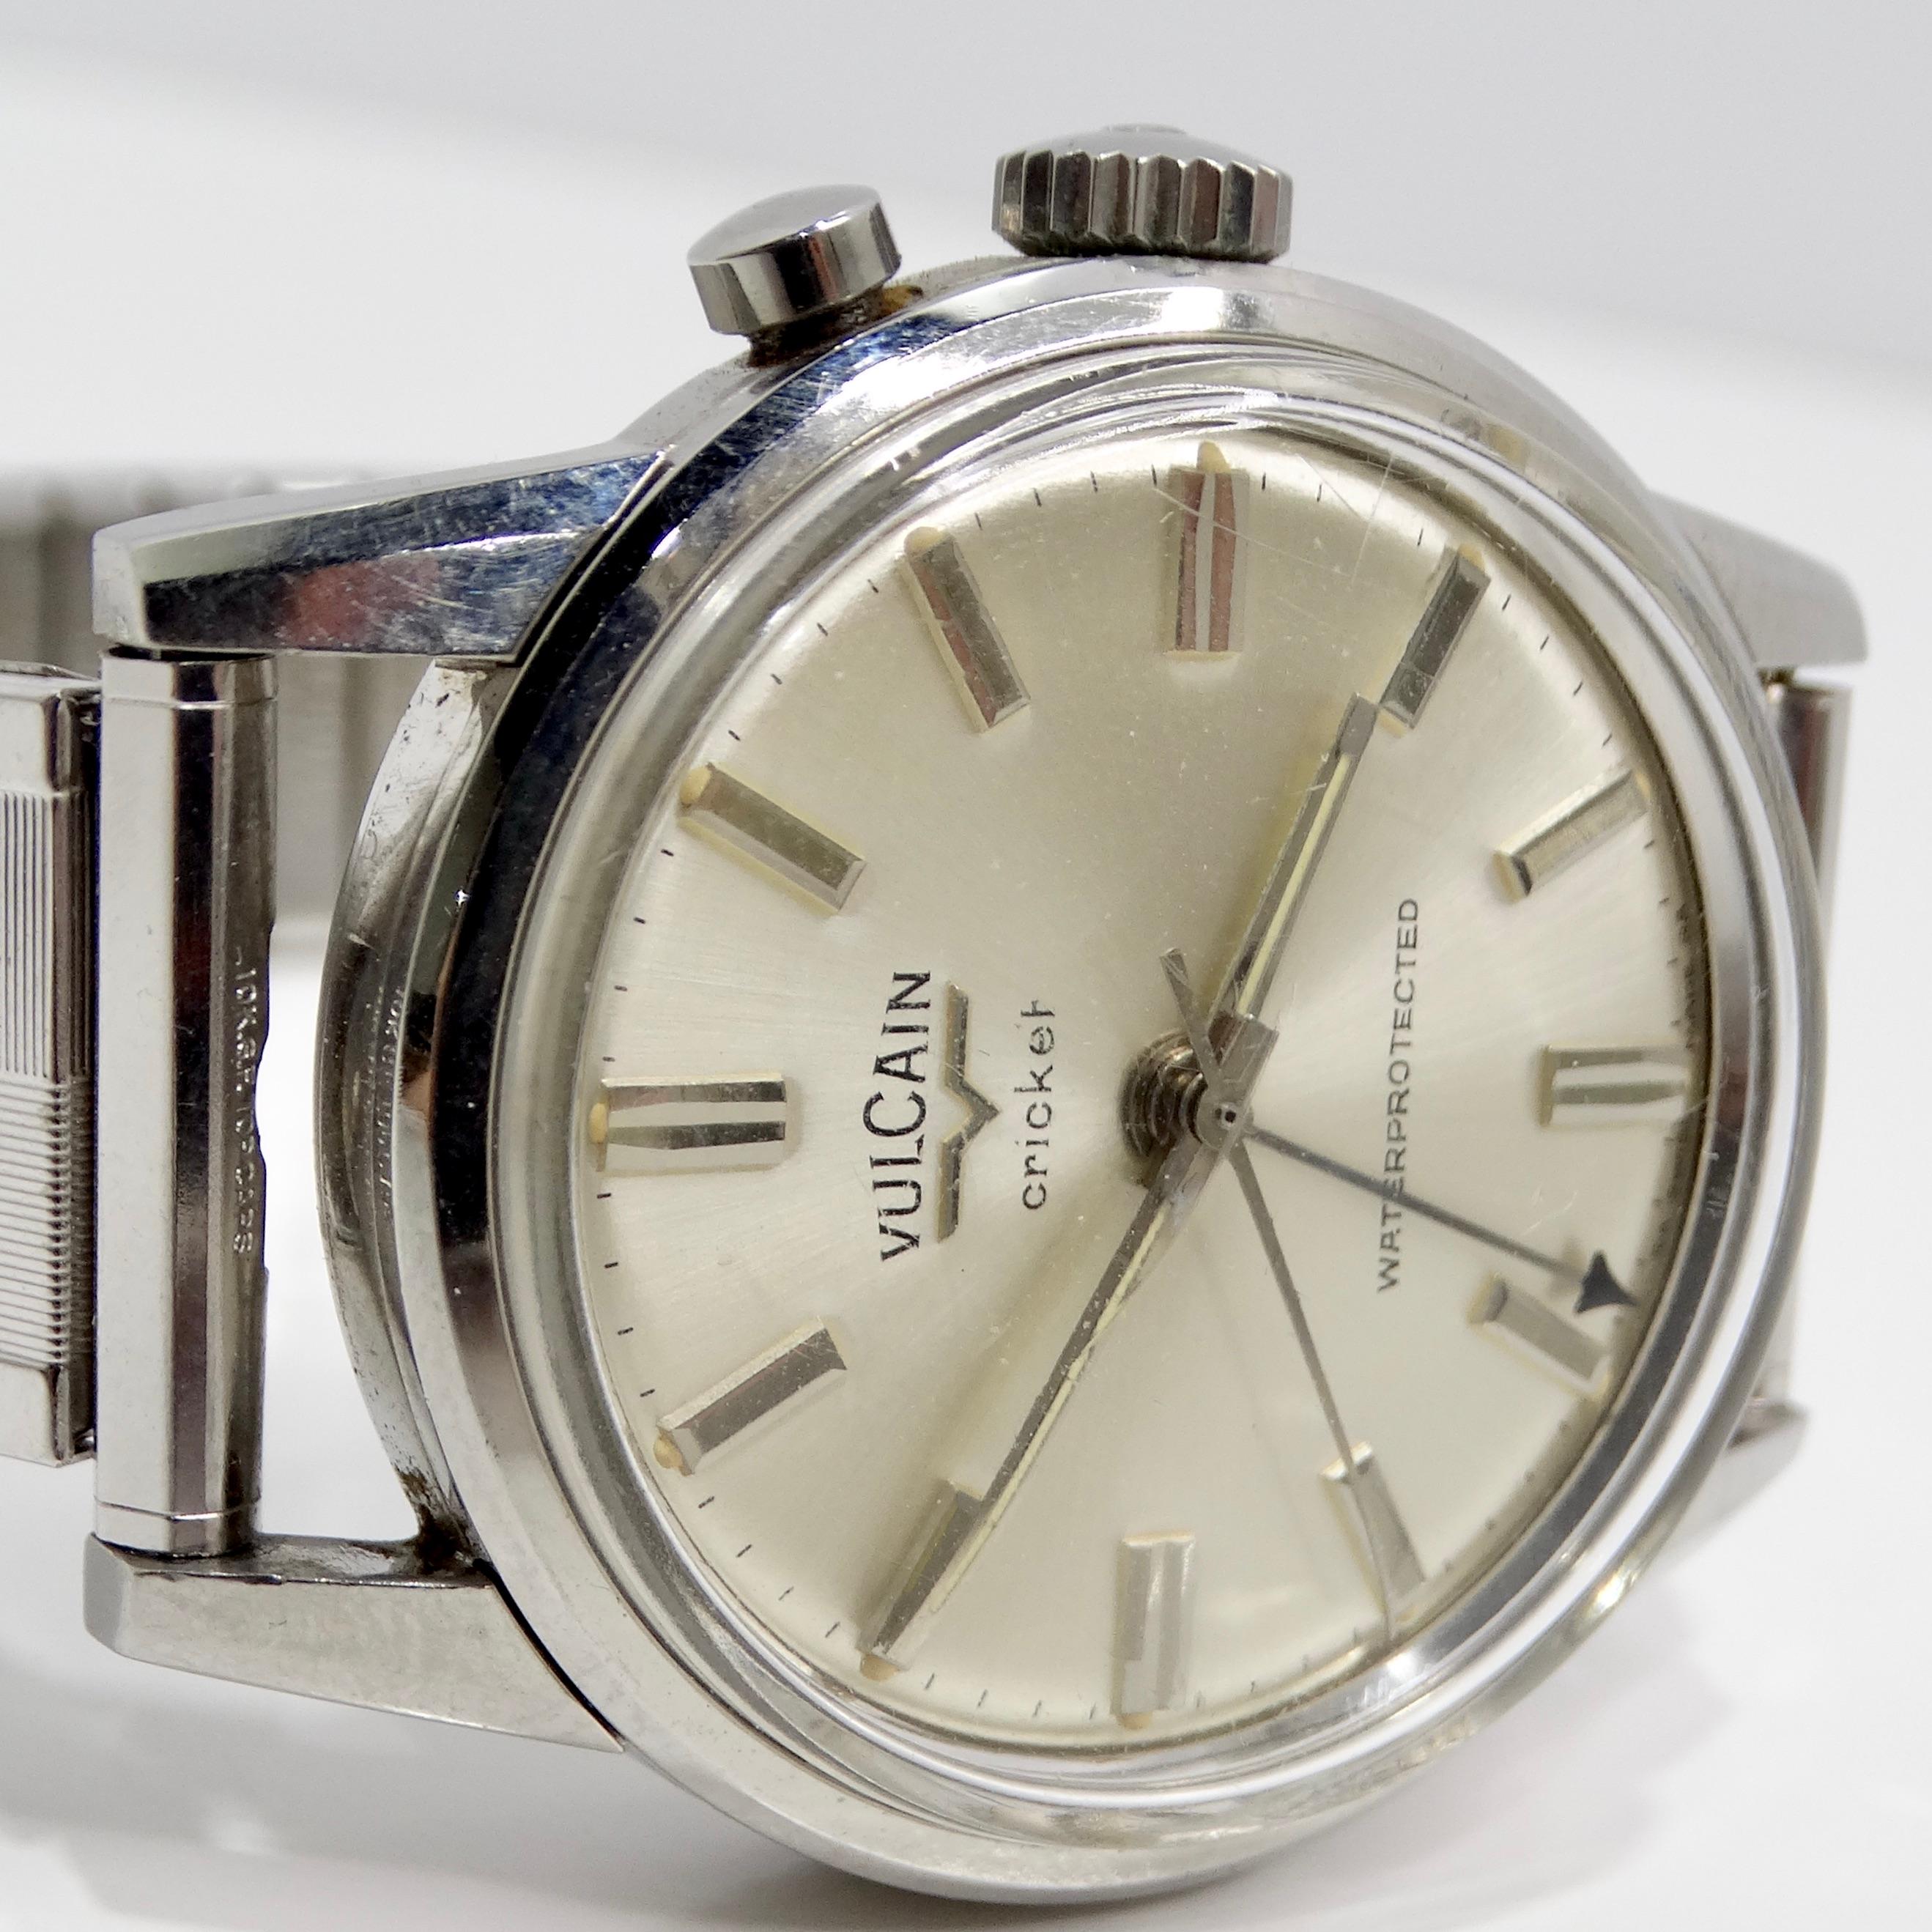 Introducing the Vulcain 1960s Stainless Steel Watch, a rare and classic wristwatch that captures the essence of vintage elegance. This exquisite watch features a silver tone stainless steel case, offering a sleek and timeless design that's suitable